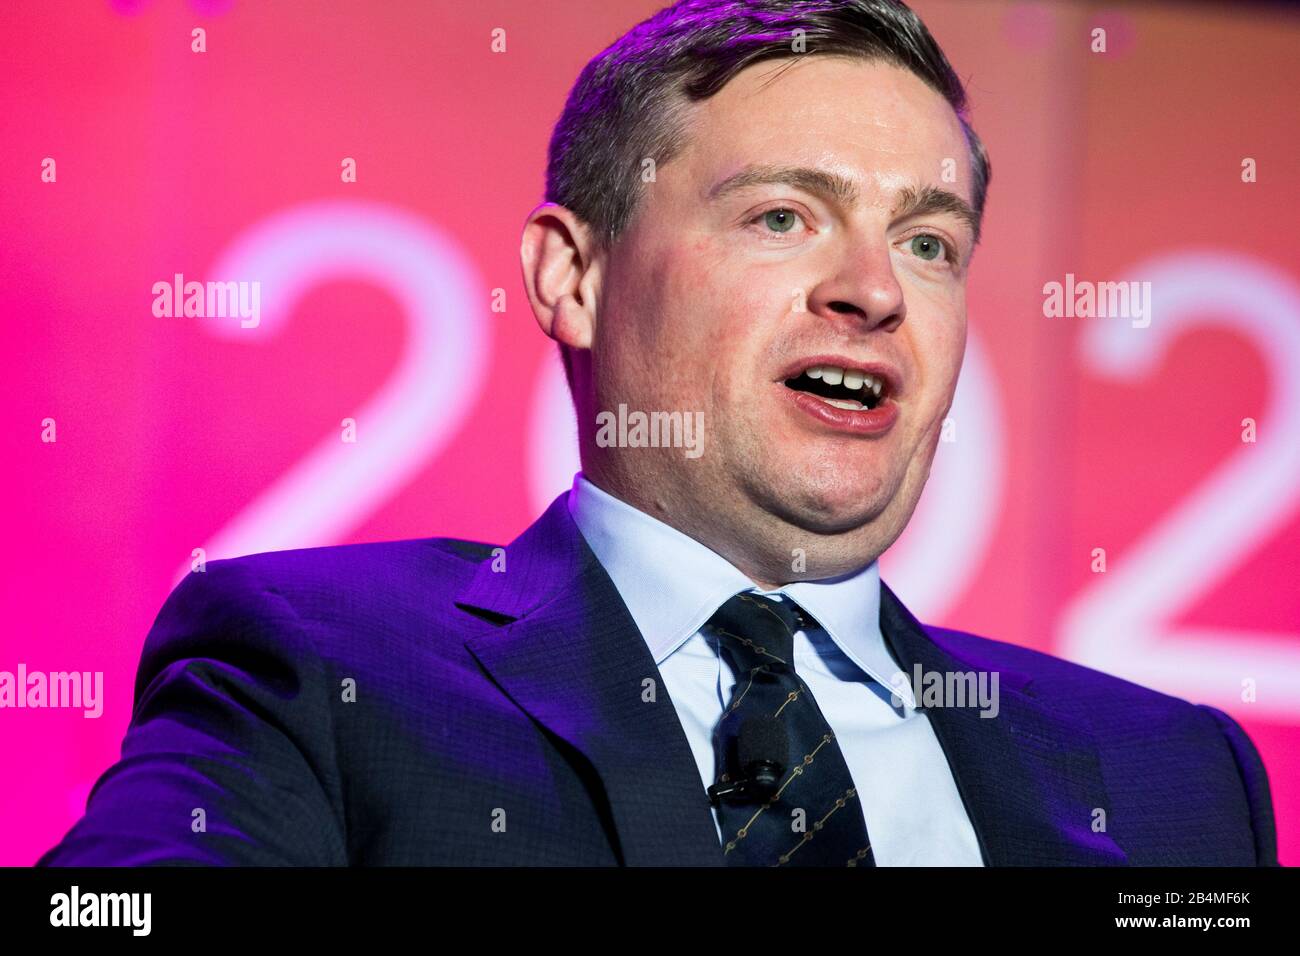 Blake Scholl, Founder and Chief Executive Officer, Boom Supersonic, speaks at the U.S. Chamber of Commerce Aviation Summit in Washington, D.C. on Marc Stock Photo